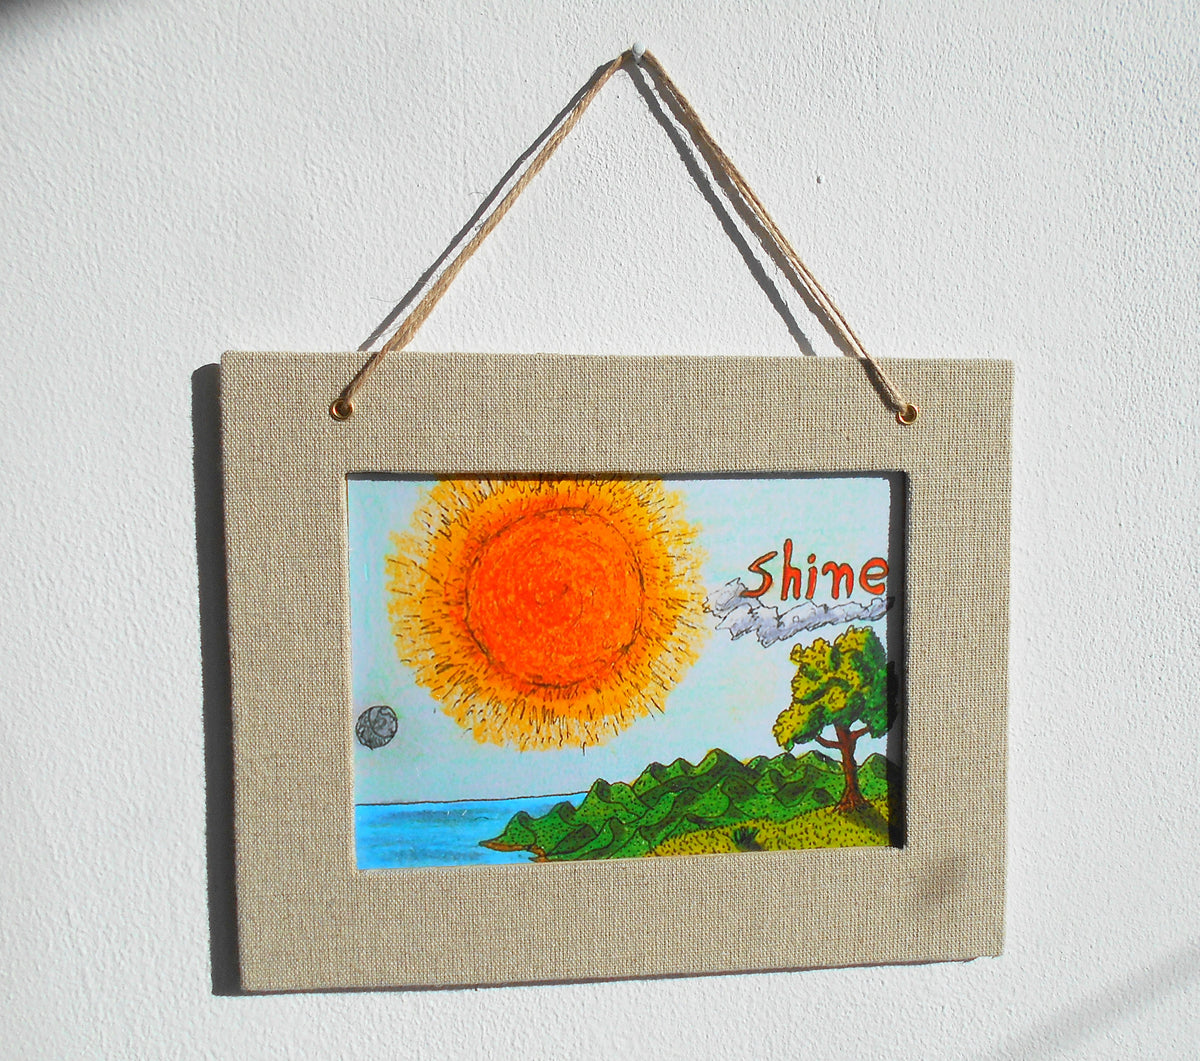 Sun wall art decor- &#39;Shine&#39; Sun-Tree-Sea inspirational poster with linen fabric-wrapped frame- landscape art hanging signed by Hristo Hvoynev